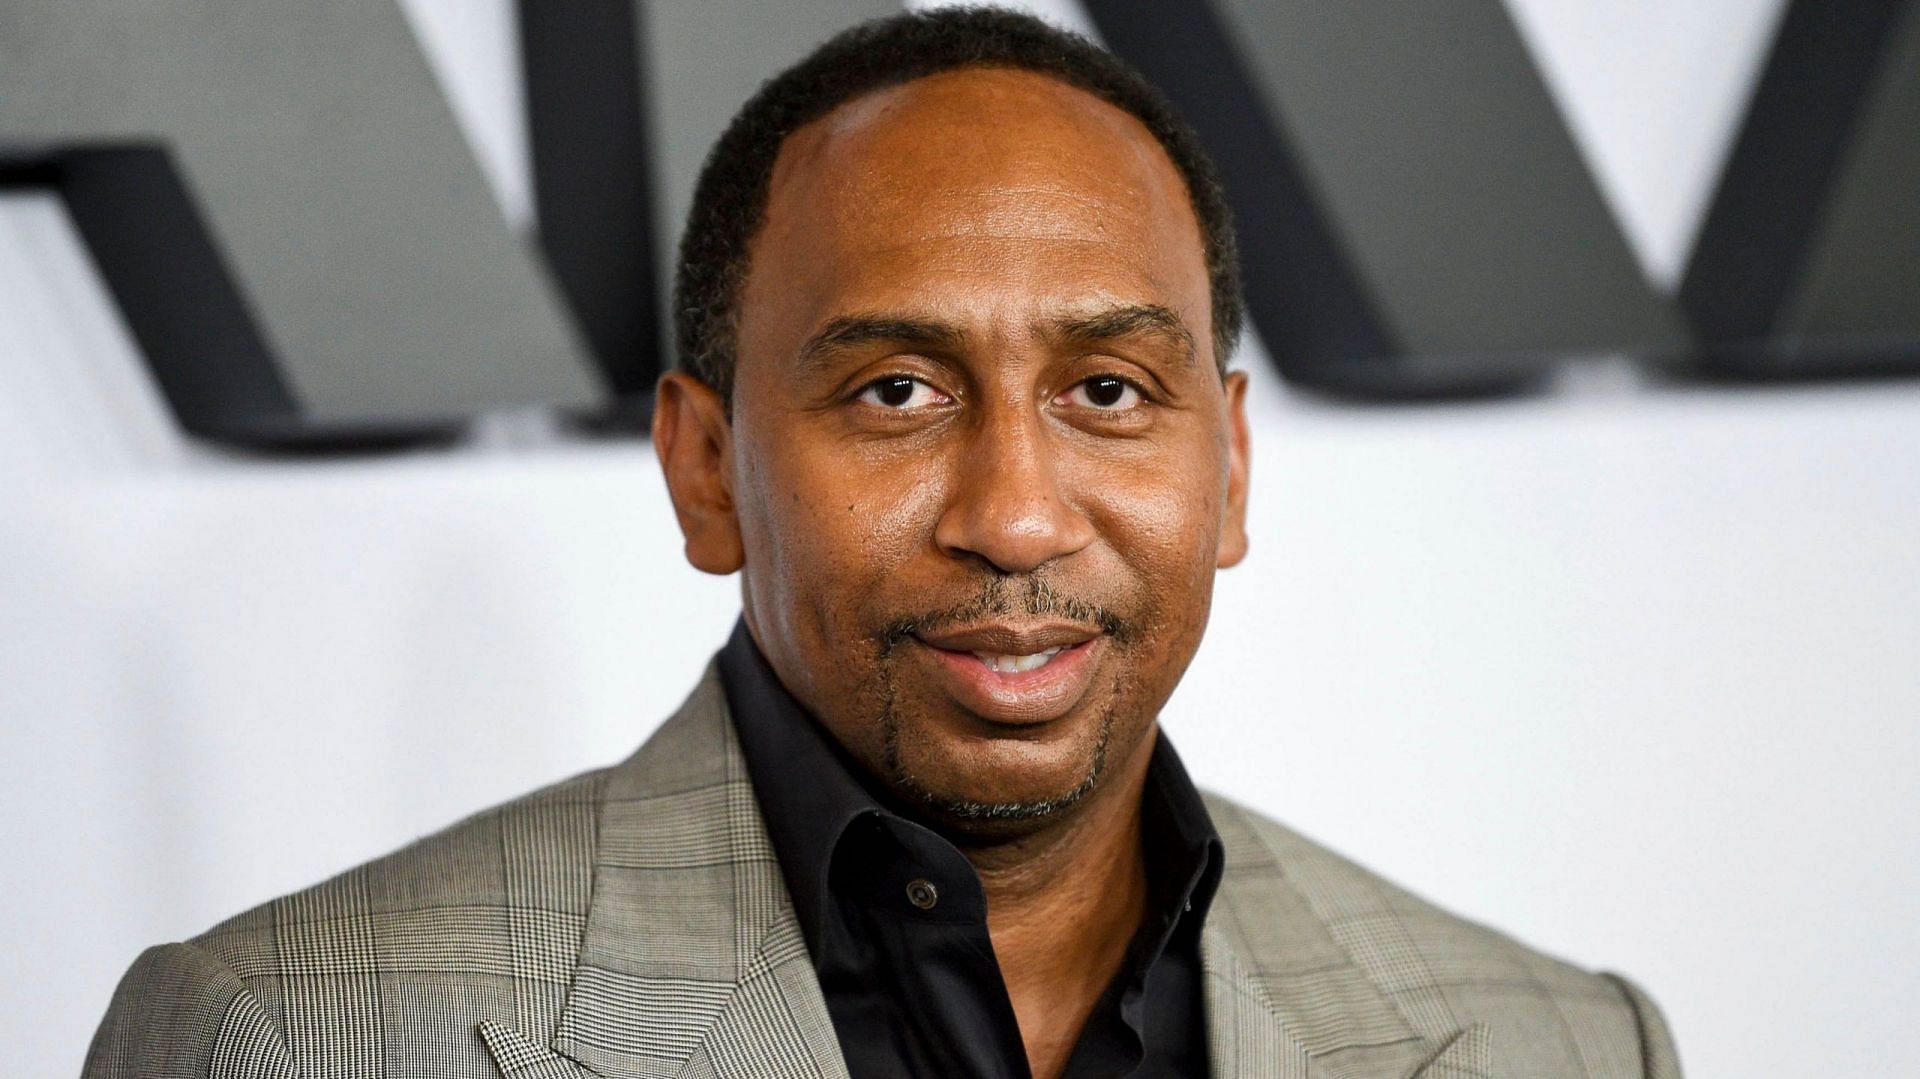 Stephen A. Smith does not believe the modern NBA players are soft